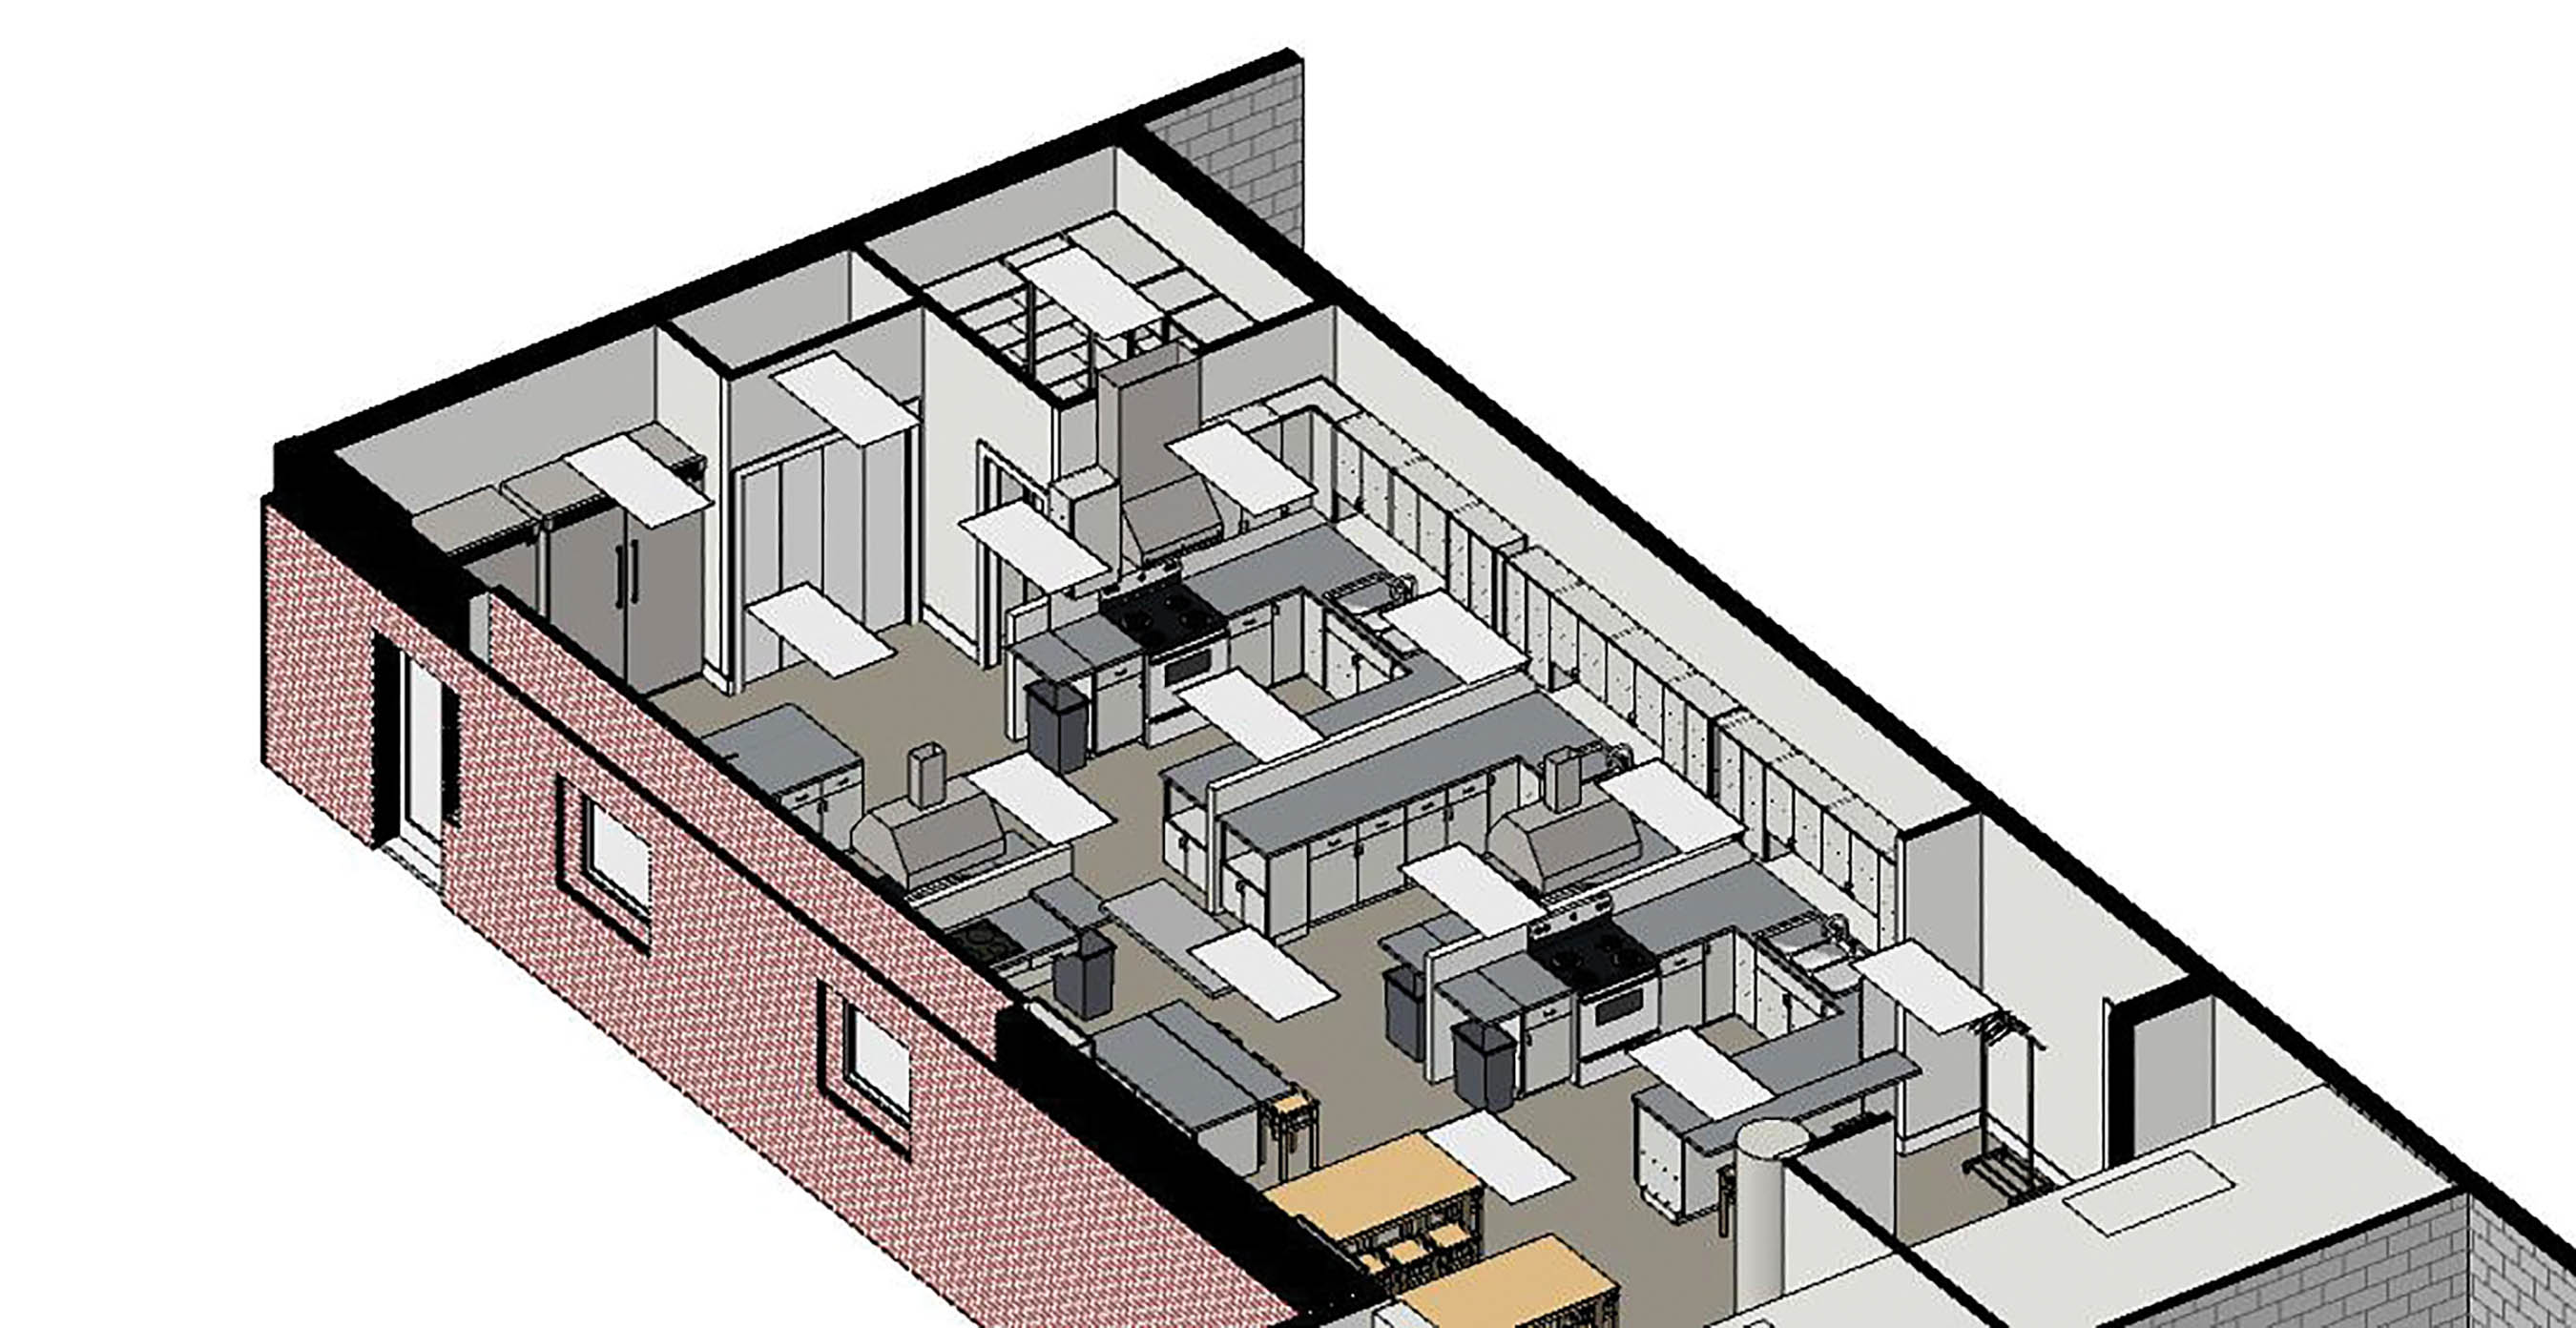 The plan for the new home ec/commercial cooking space in the current library.